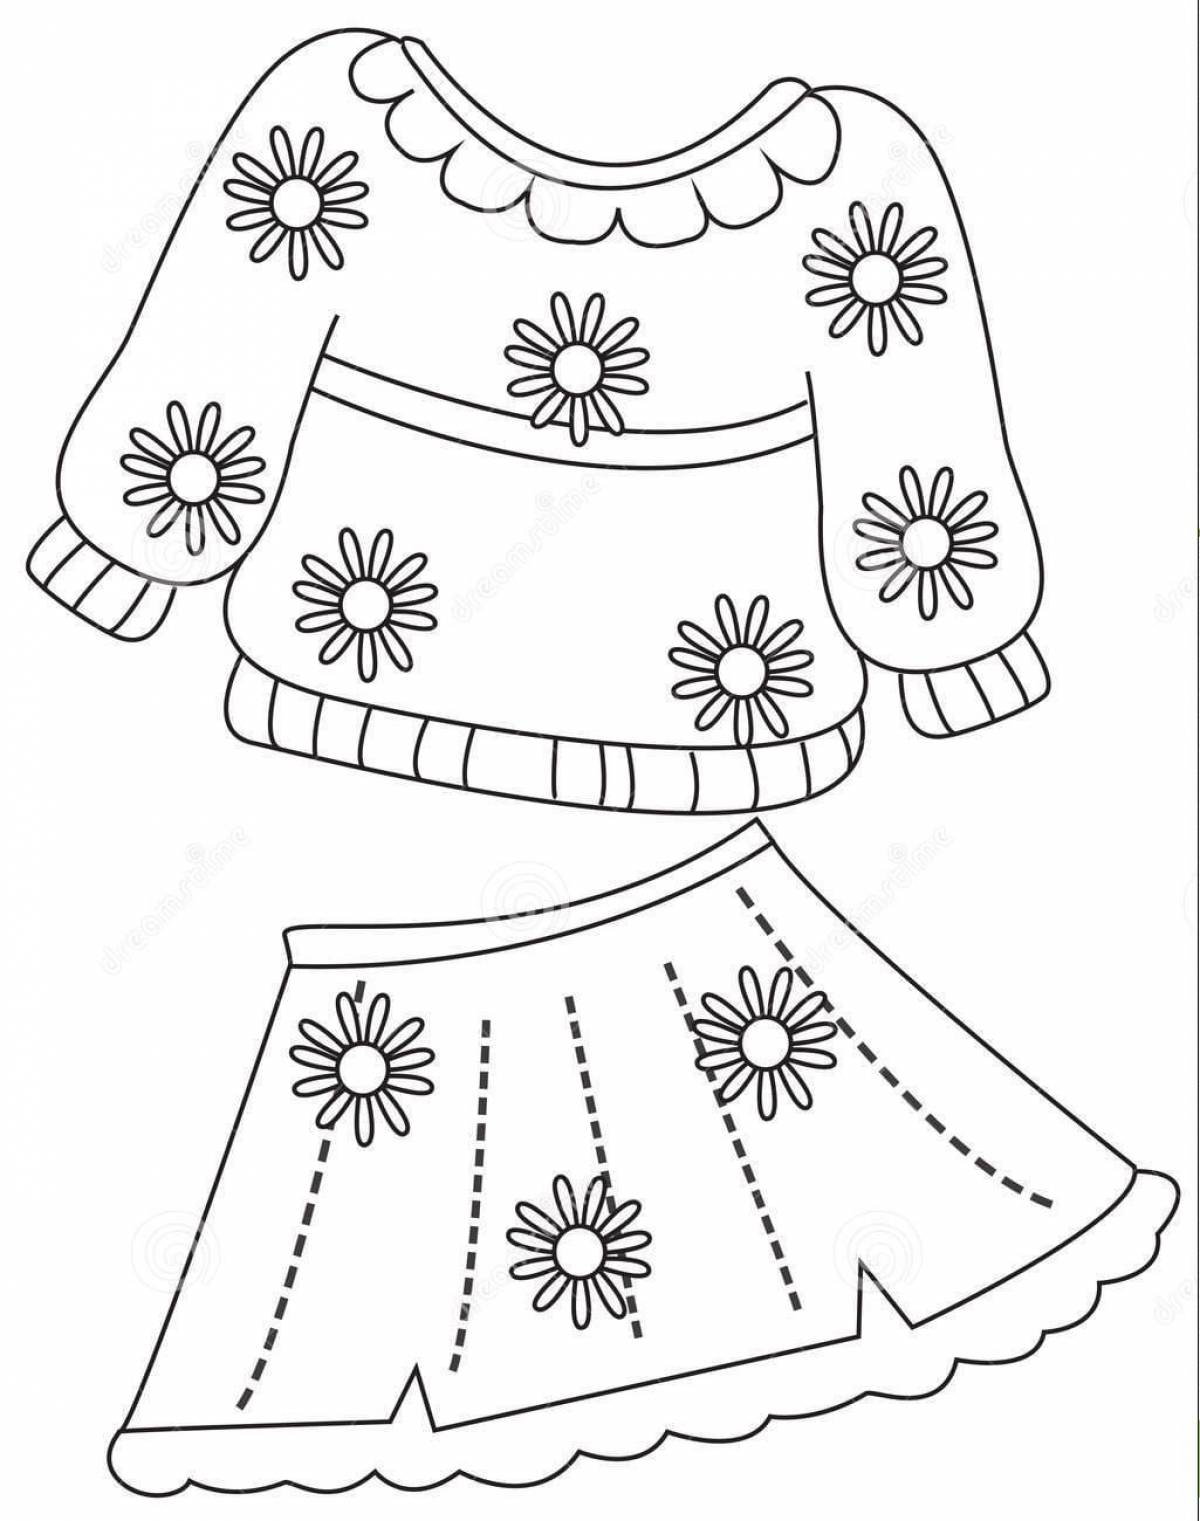 Fun coloring dress for children 2-3 years old